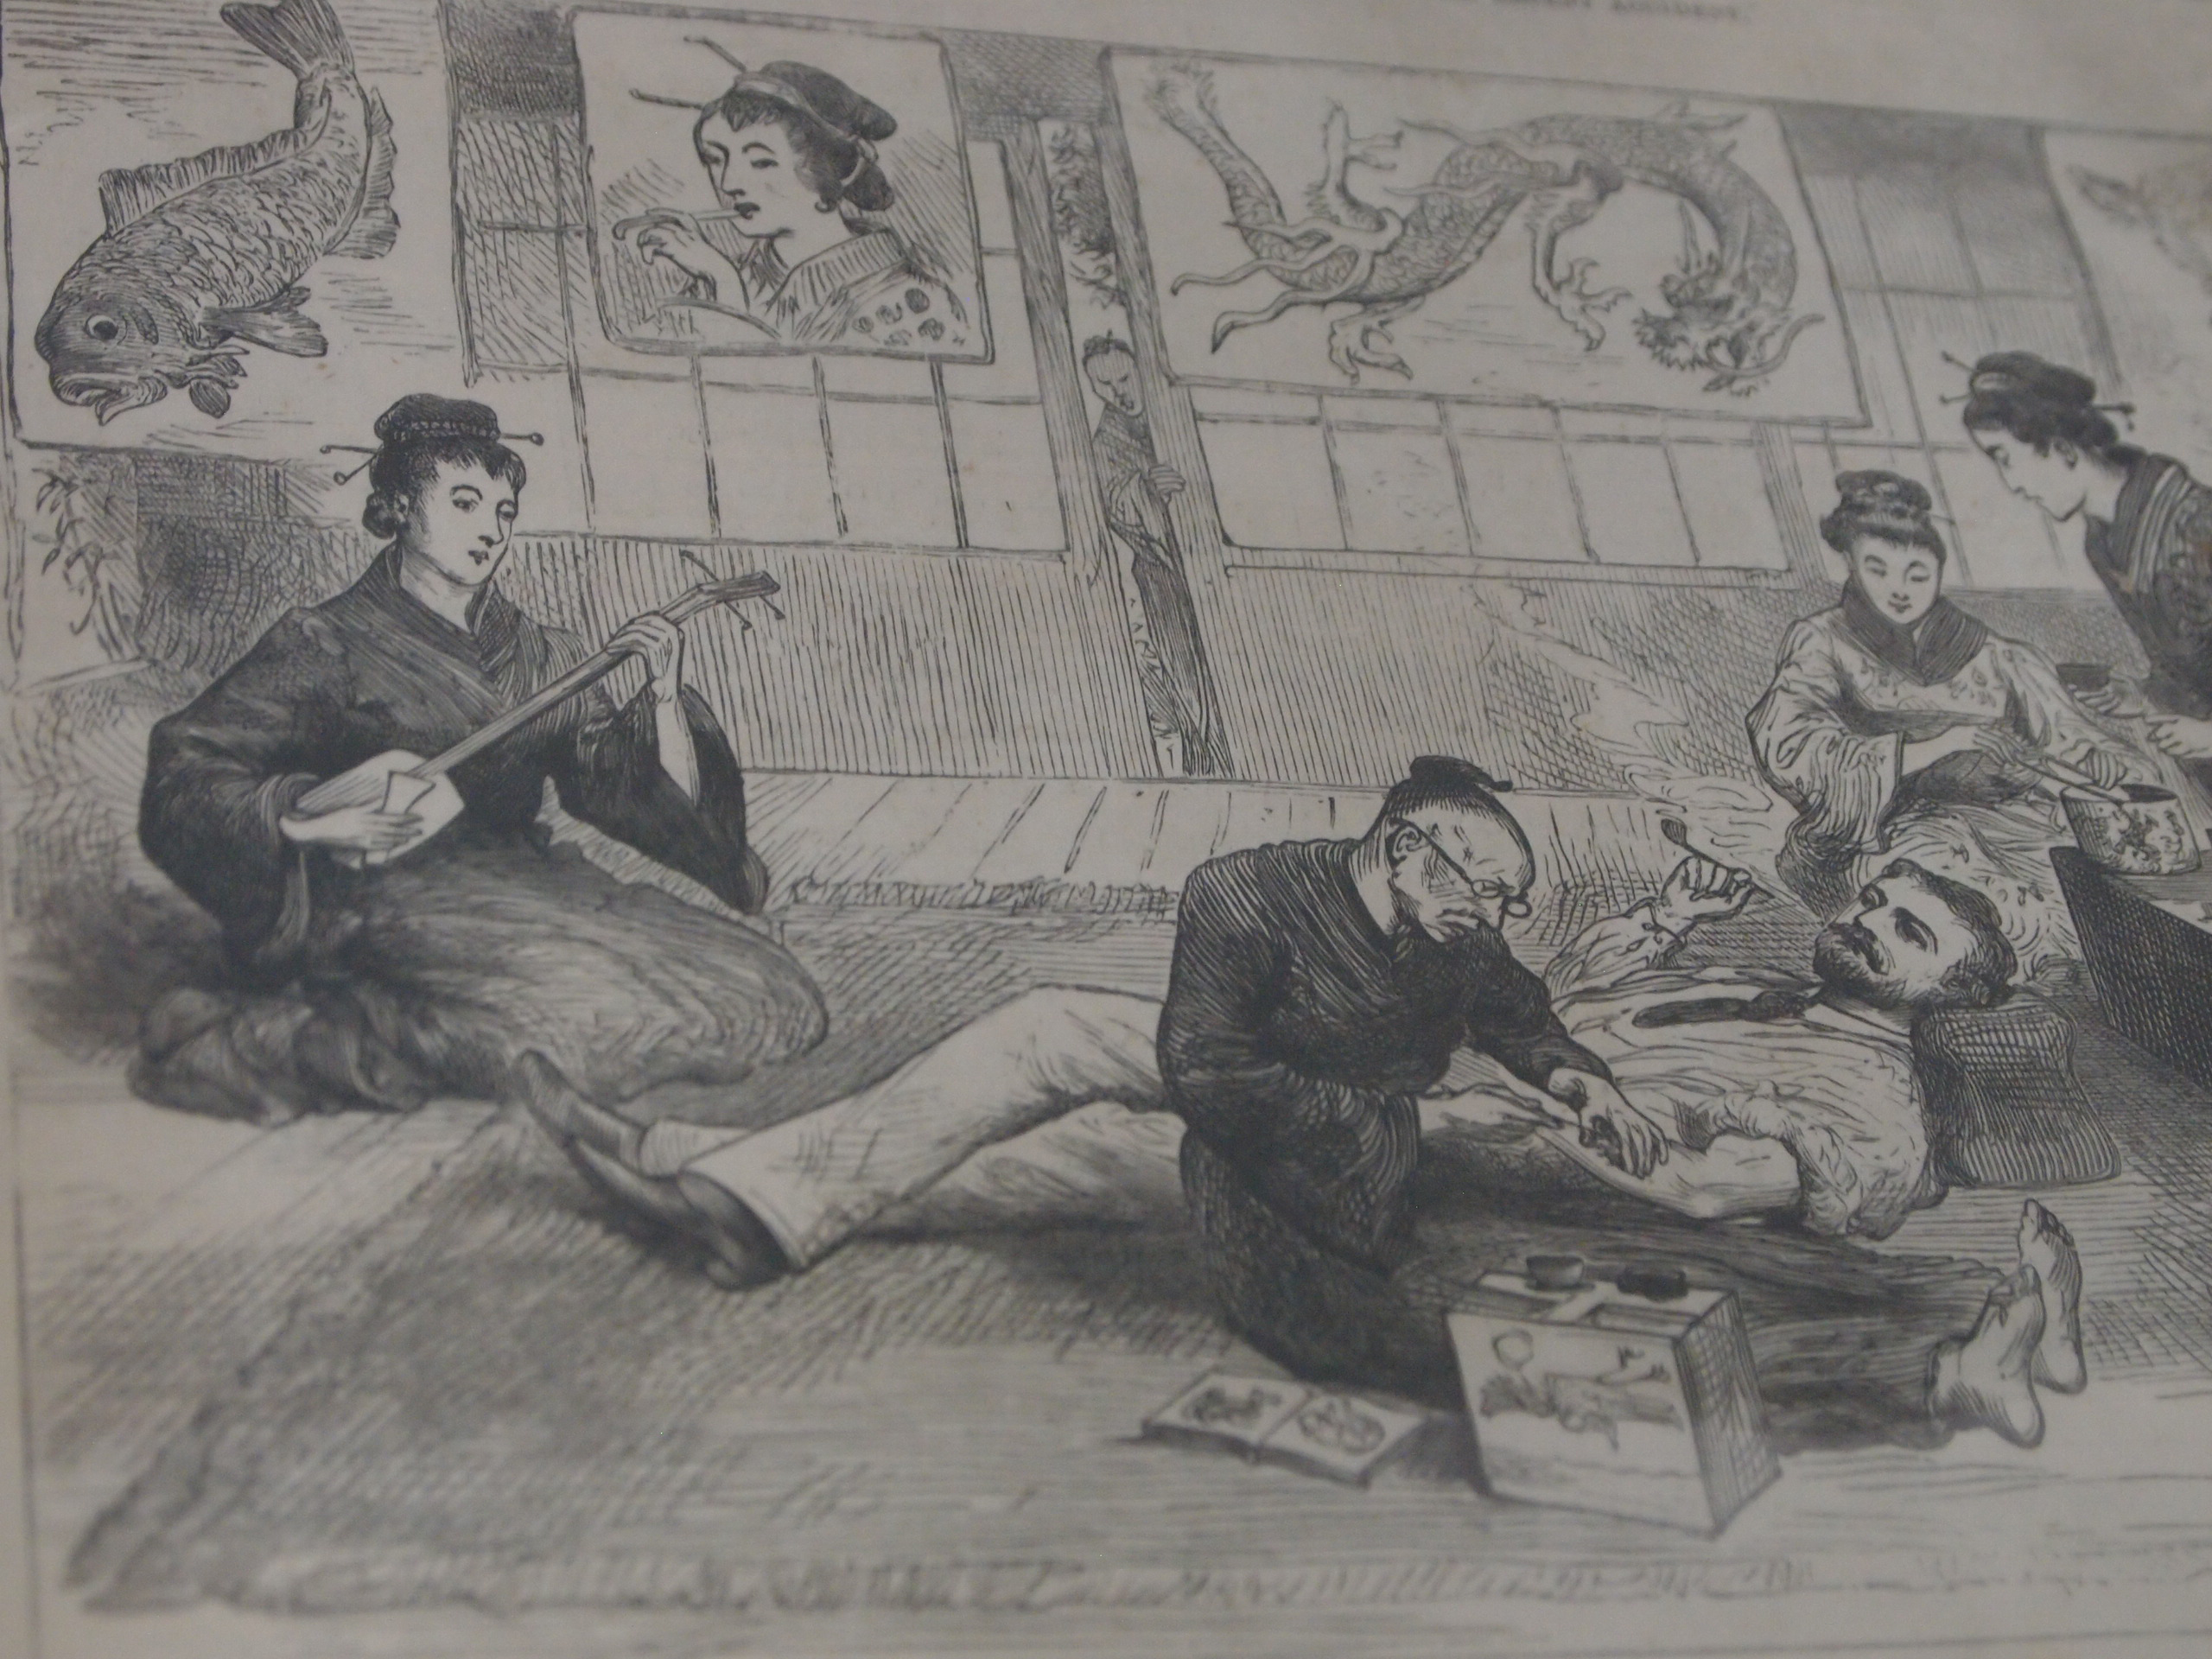 Tats life: An 1882 image from the Illustrated London News shows a foreigner being tattooed in Nagasaki. | COURTESY OF THE YOKOHAMA TATTOO MUSEUM